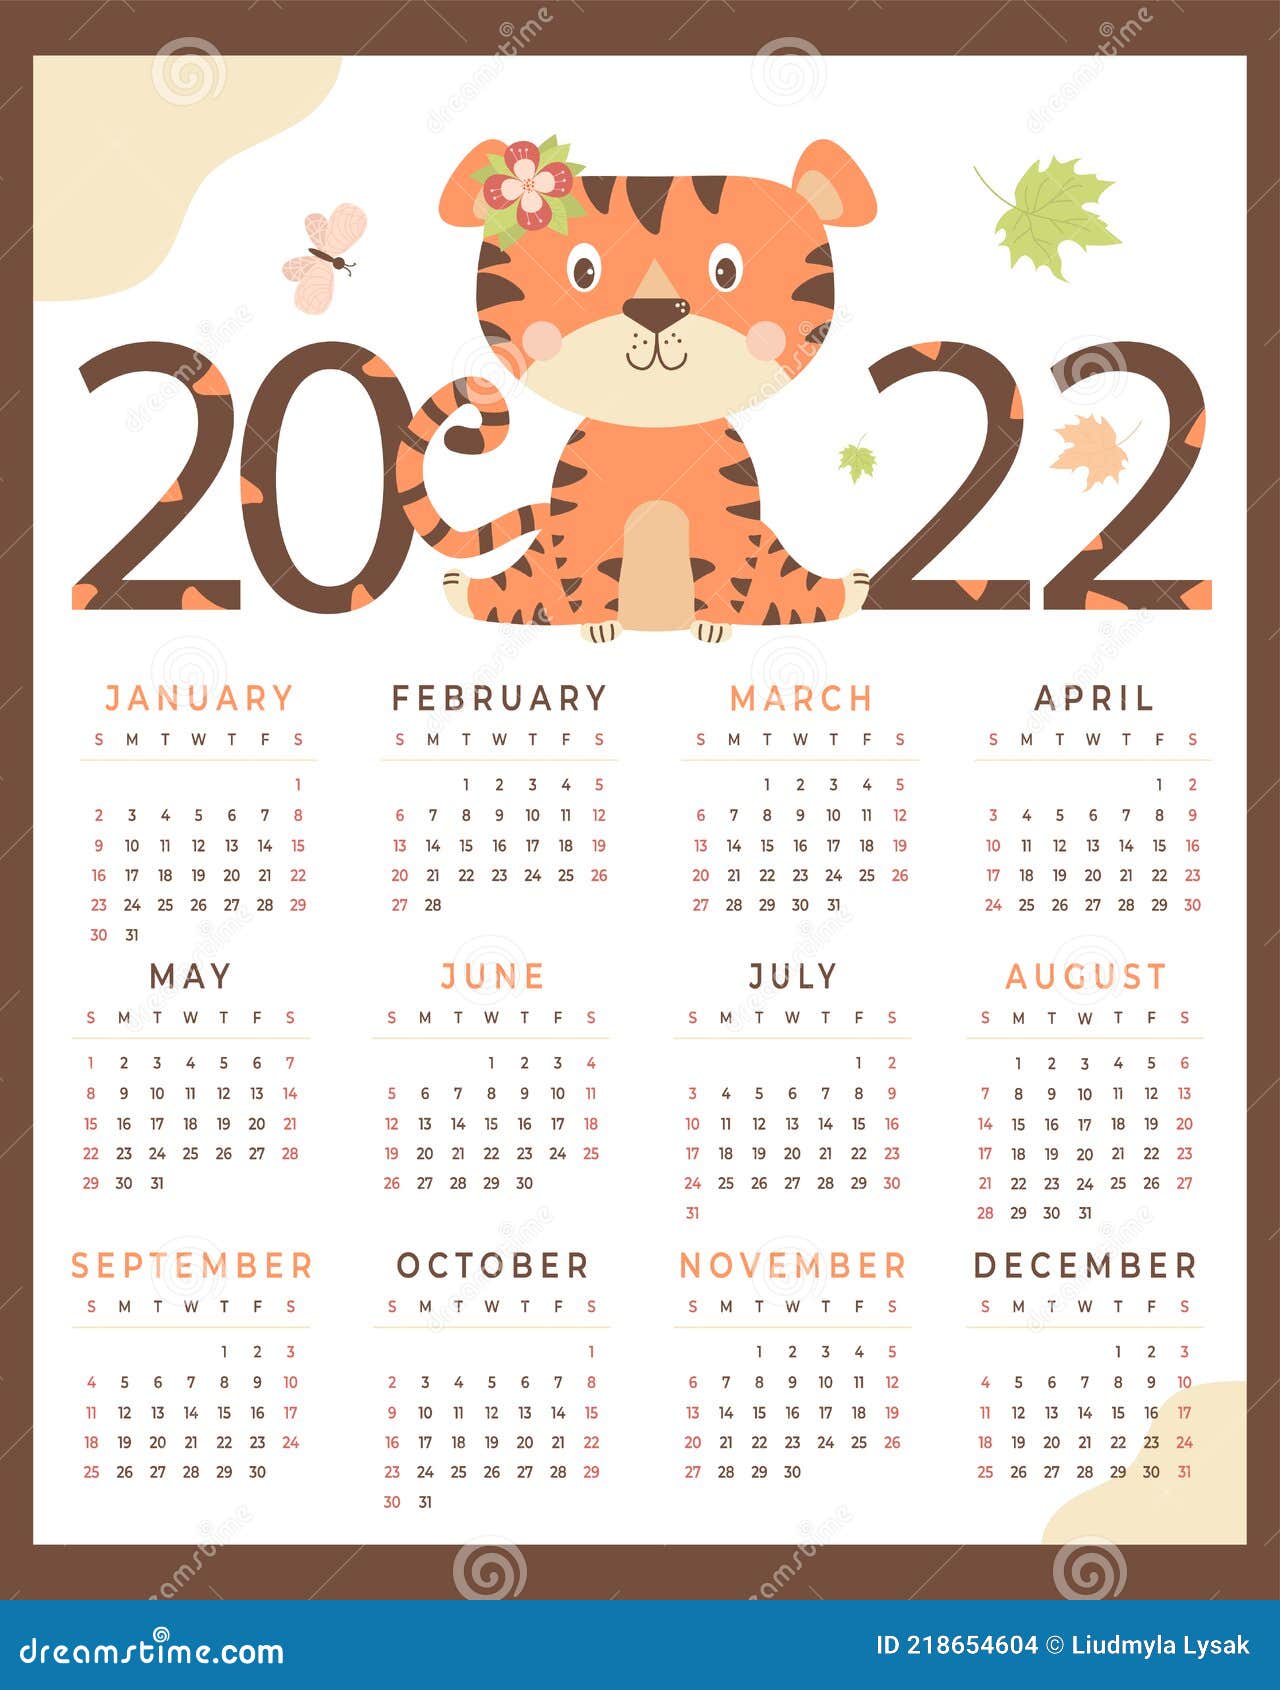 Chinese New Year 2022 Calendar Tiger Calendar For 2022. Tiger Symbol Of The New Year 2022. Childrens  Calendar With A Cute Animal, Flowers And A Stock Vector - Illustration Of  Animal, Planner: 218654604